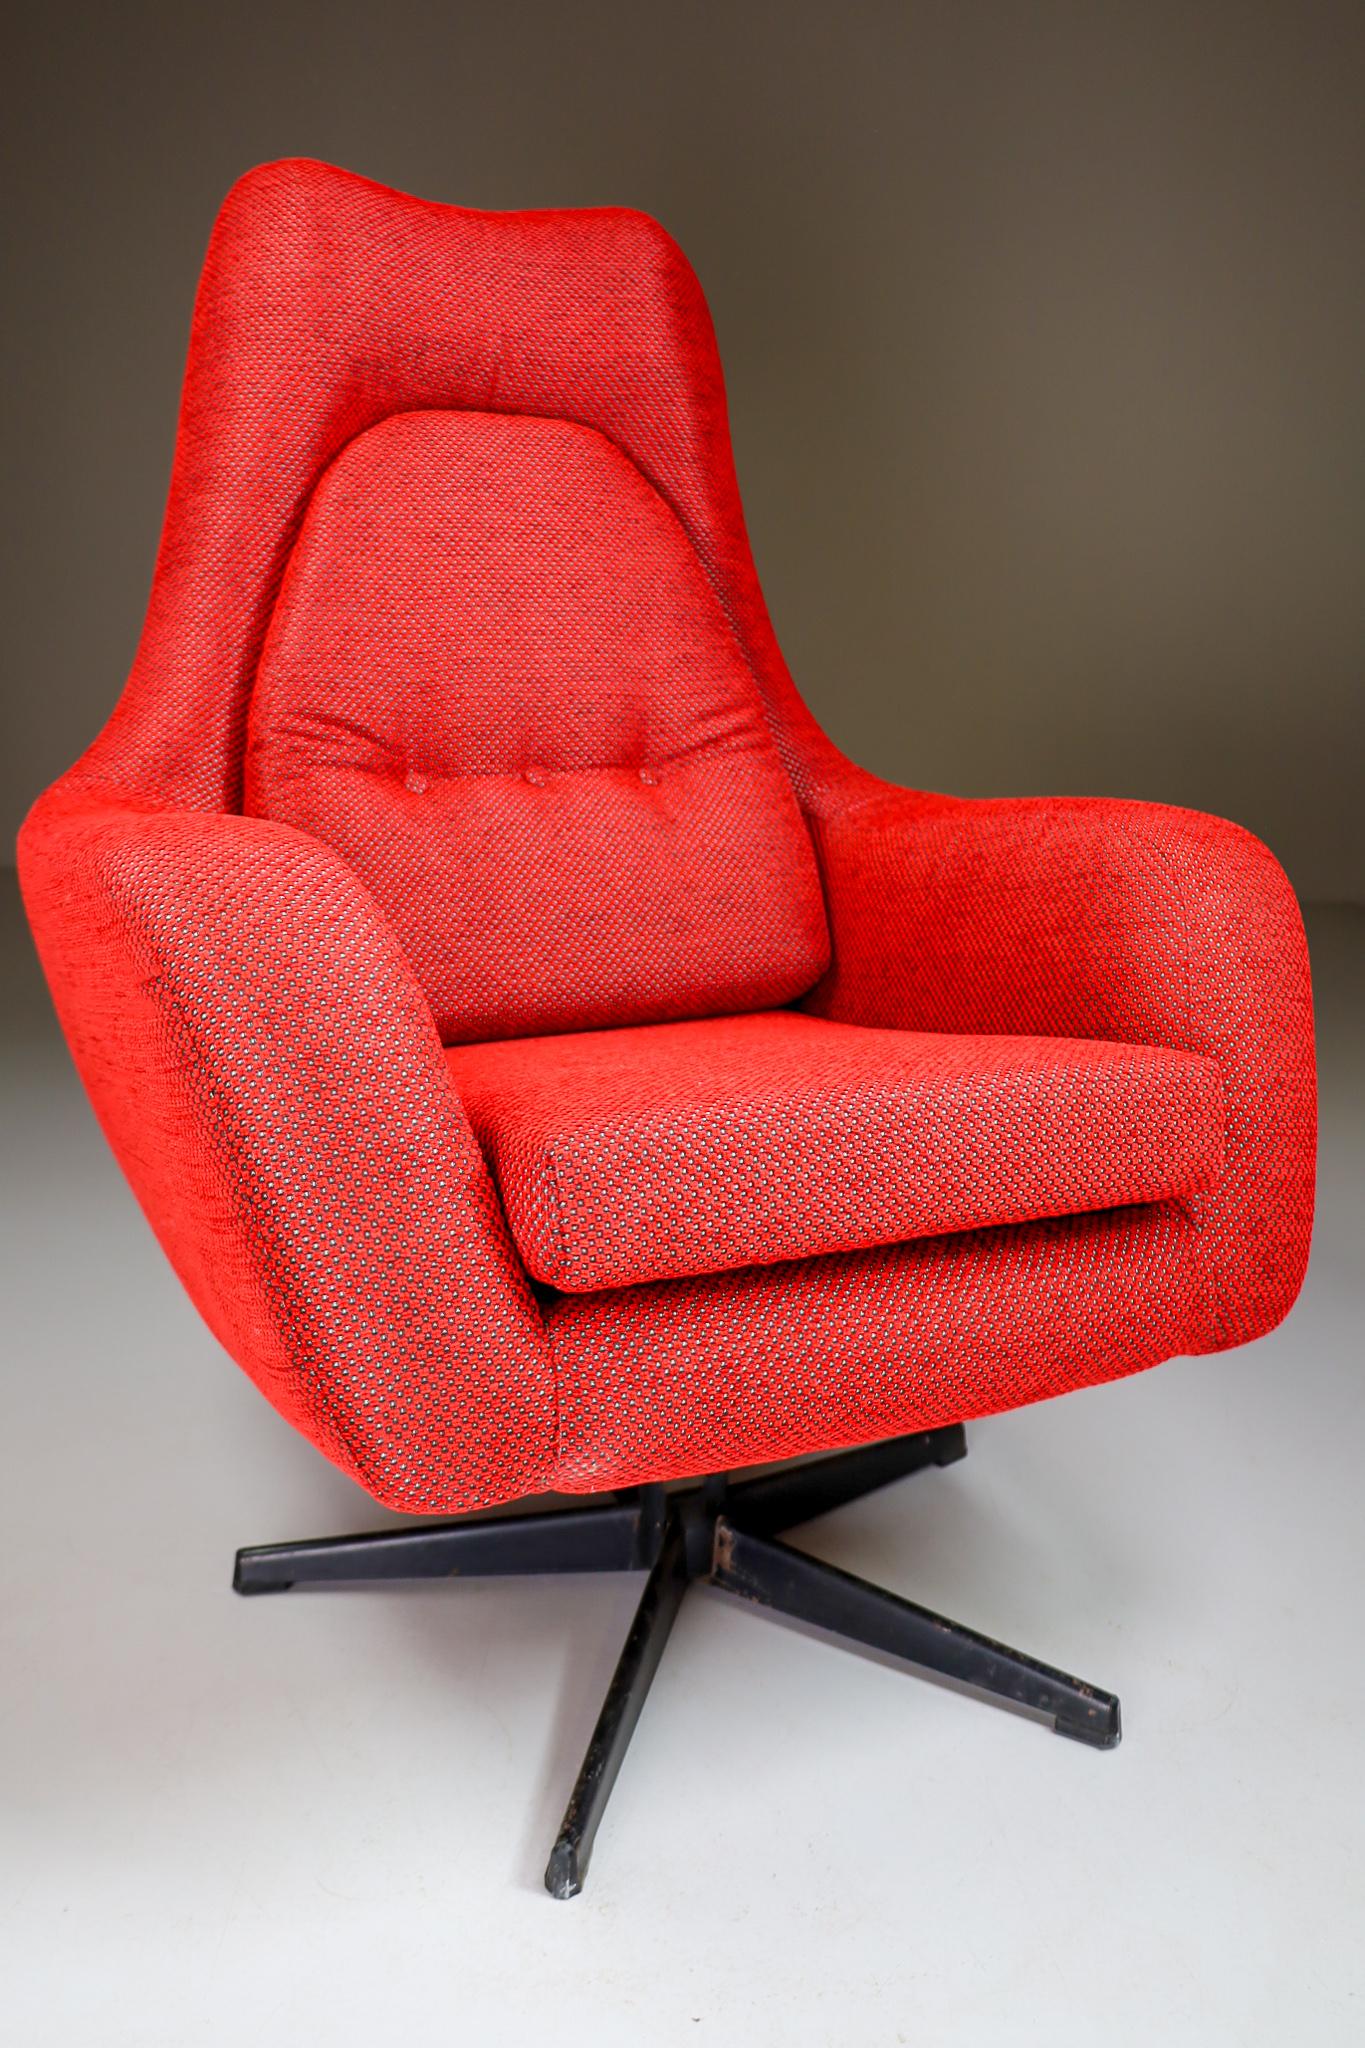 Pair of Swivel Chairs in New Reupholstered Red Fabric, Czech Republic 1970 For Sale 4